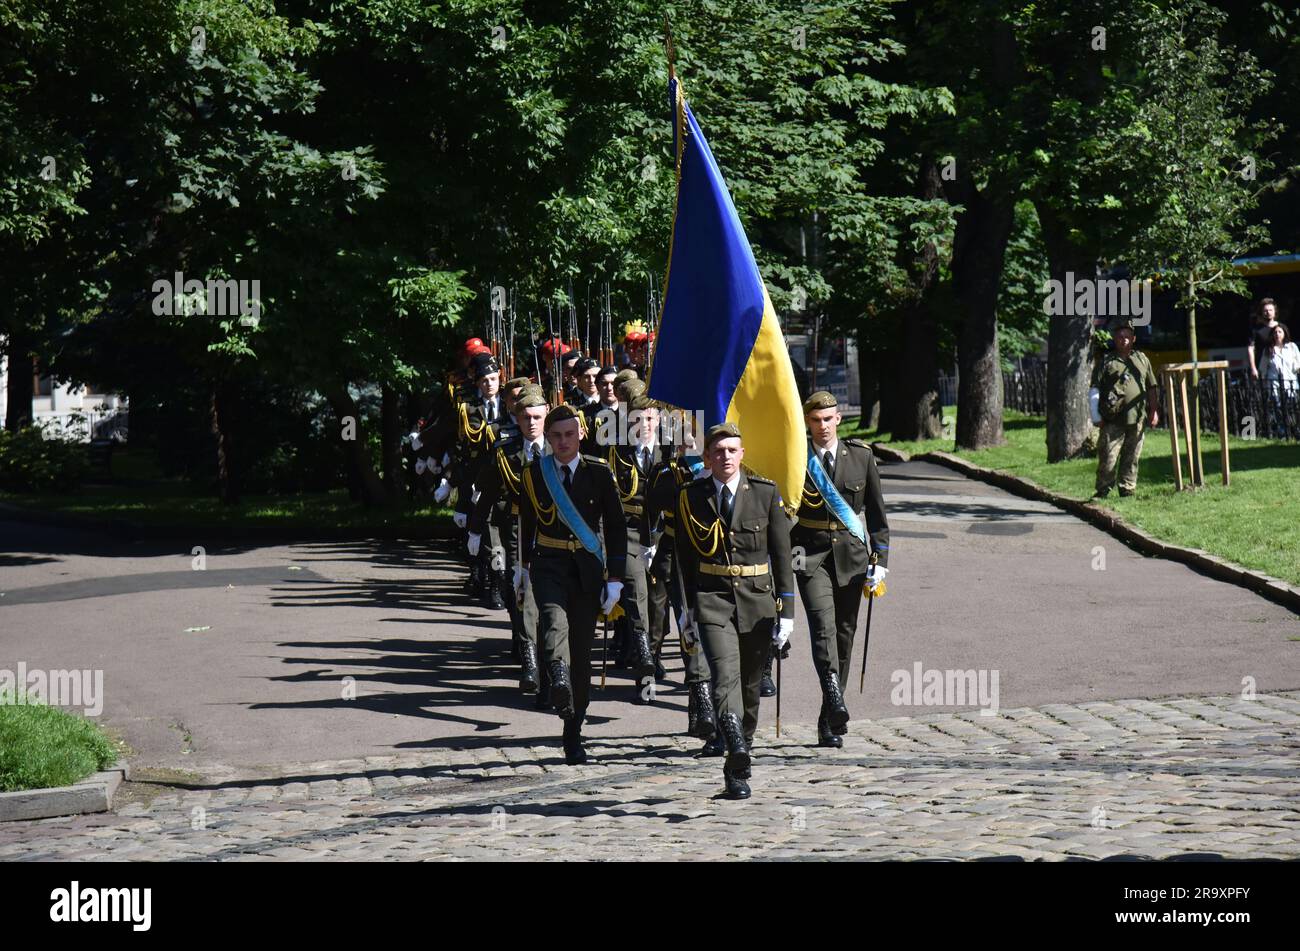 Cadets from the honor guard march during the celebration of the Constitution Day of Ukraine. Ukraine celebrated the 27th anniversary of the adoption of the country's basic law - the constitution. In the conditions of the Russian-Ukrainian war, official events were very short. In Lviv, the Ukrainian flag was raised, honor guard marched, and a military band performed. (Photo by Pavlo Palamarchuk / SOPA mages/Sipa USA) Stock Photo